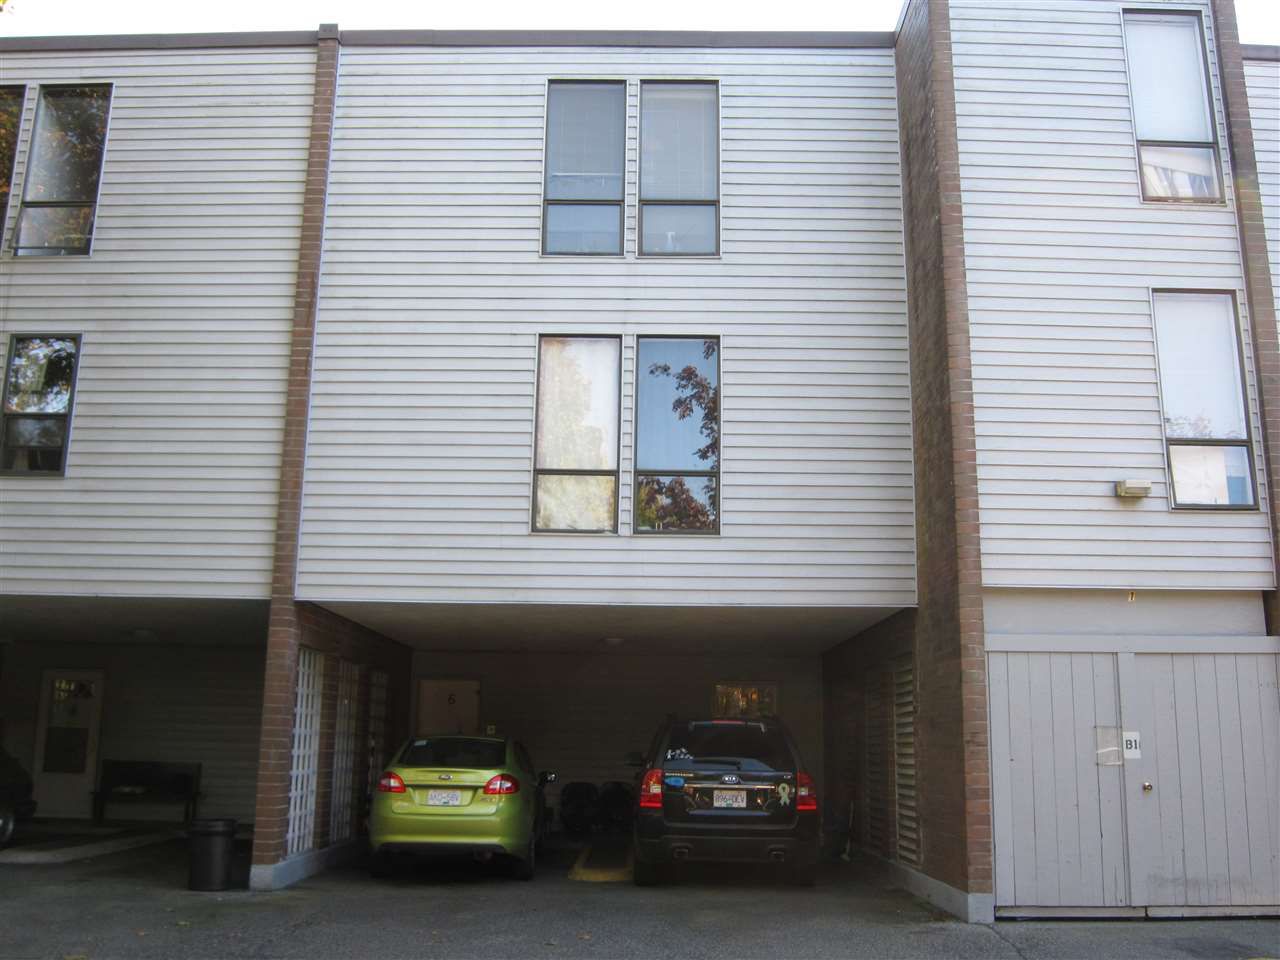 Main Photo: 5 10200 4TH AVENUE in : Steveston North Townhouse for sale : MLS®# R2114159